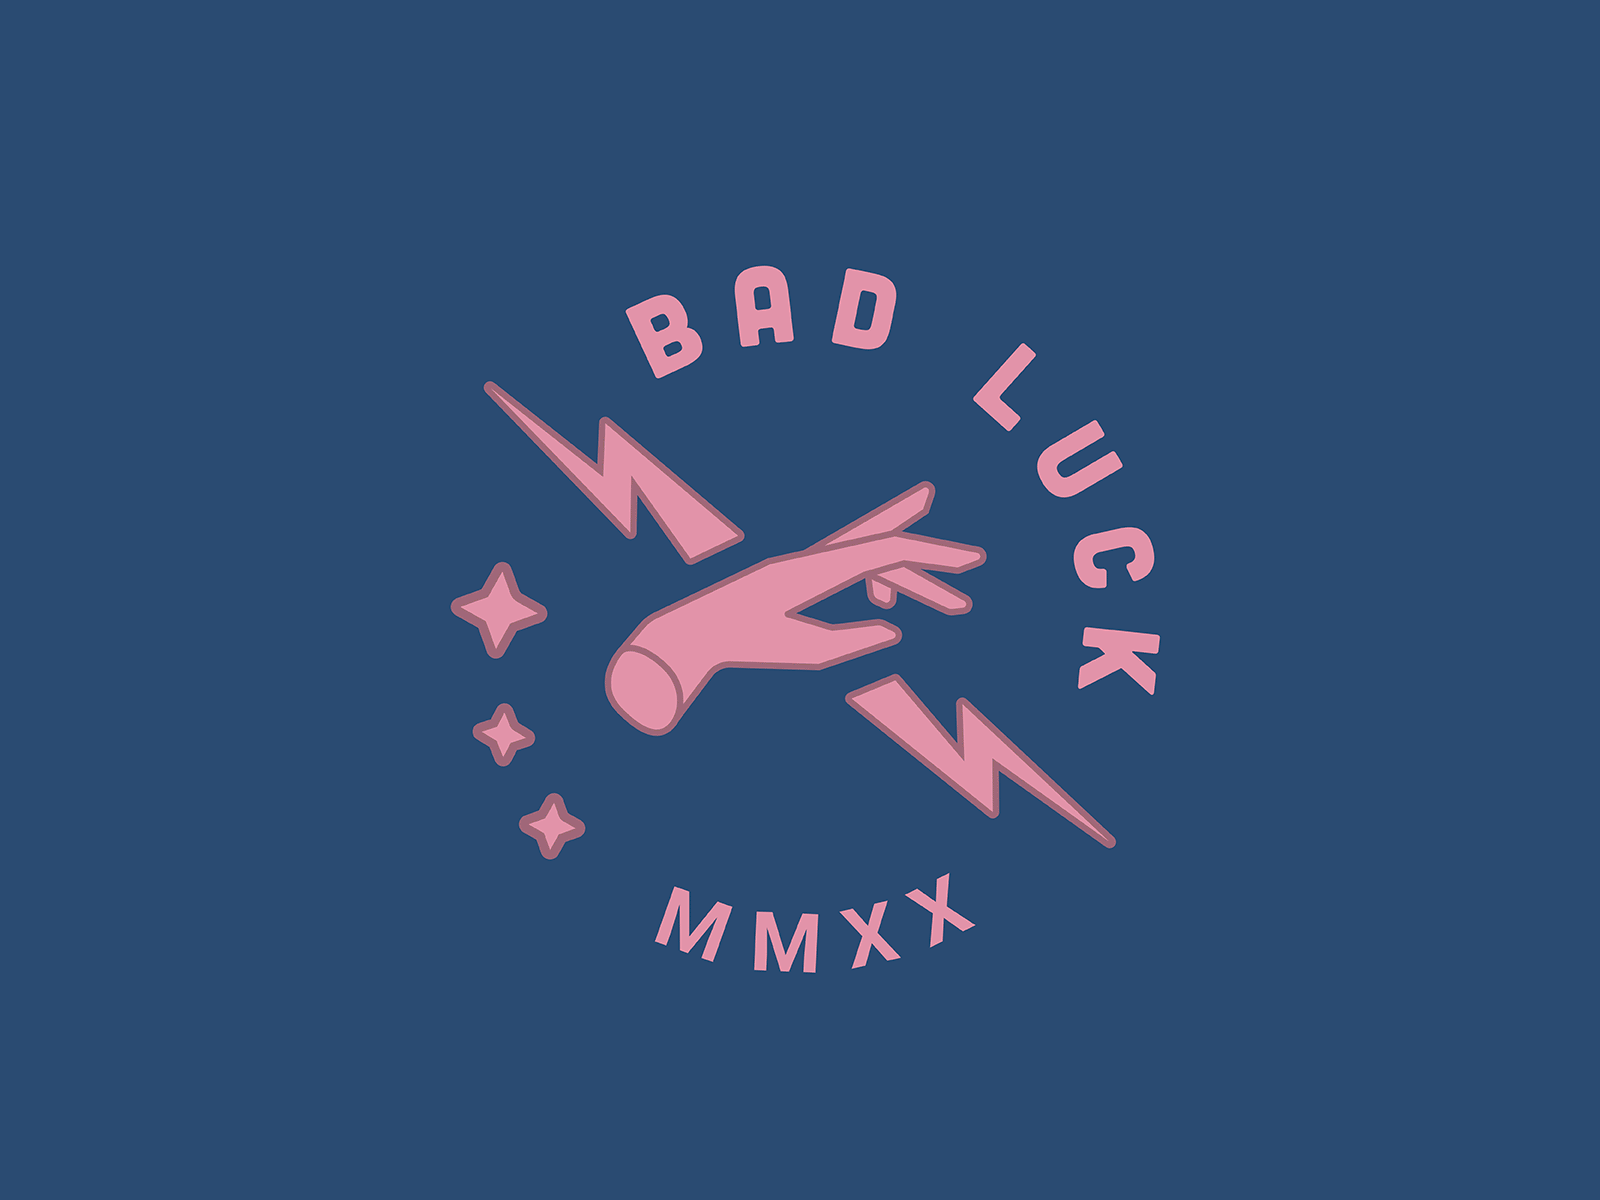 BAD LUCK by Jacob Mead on Dribbble